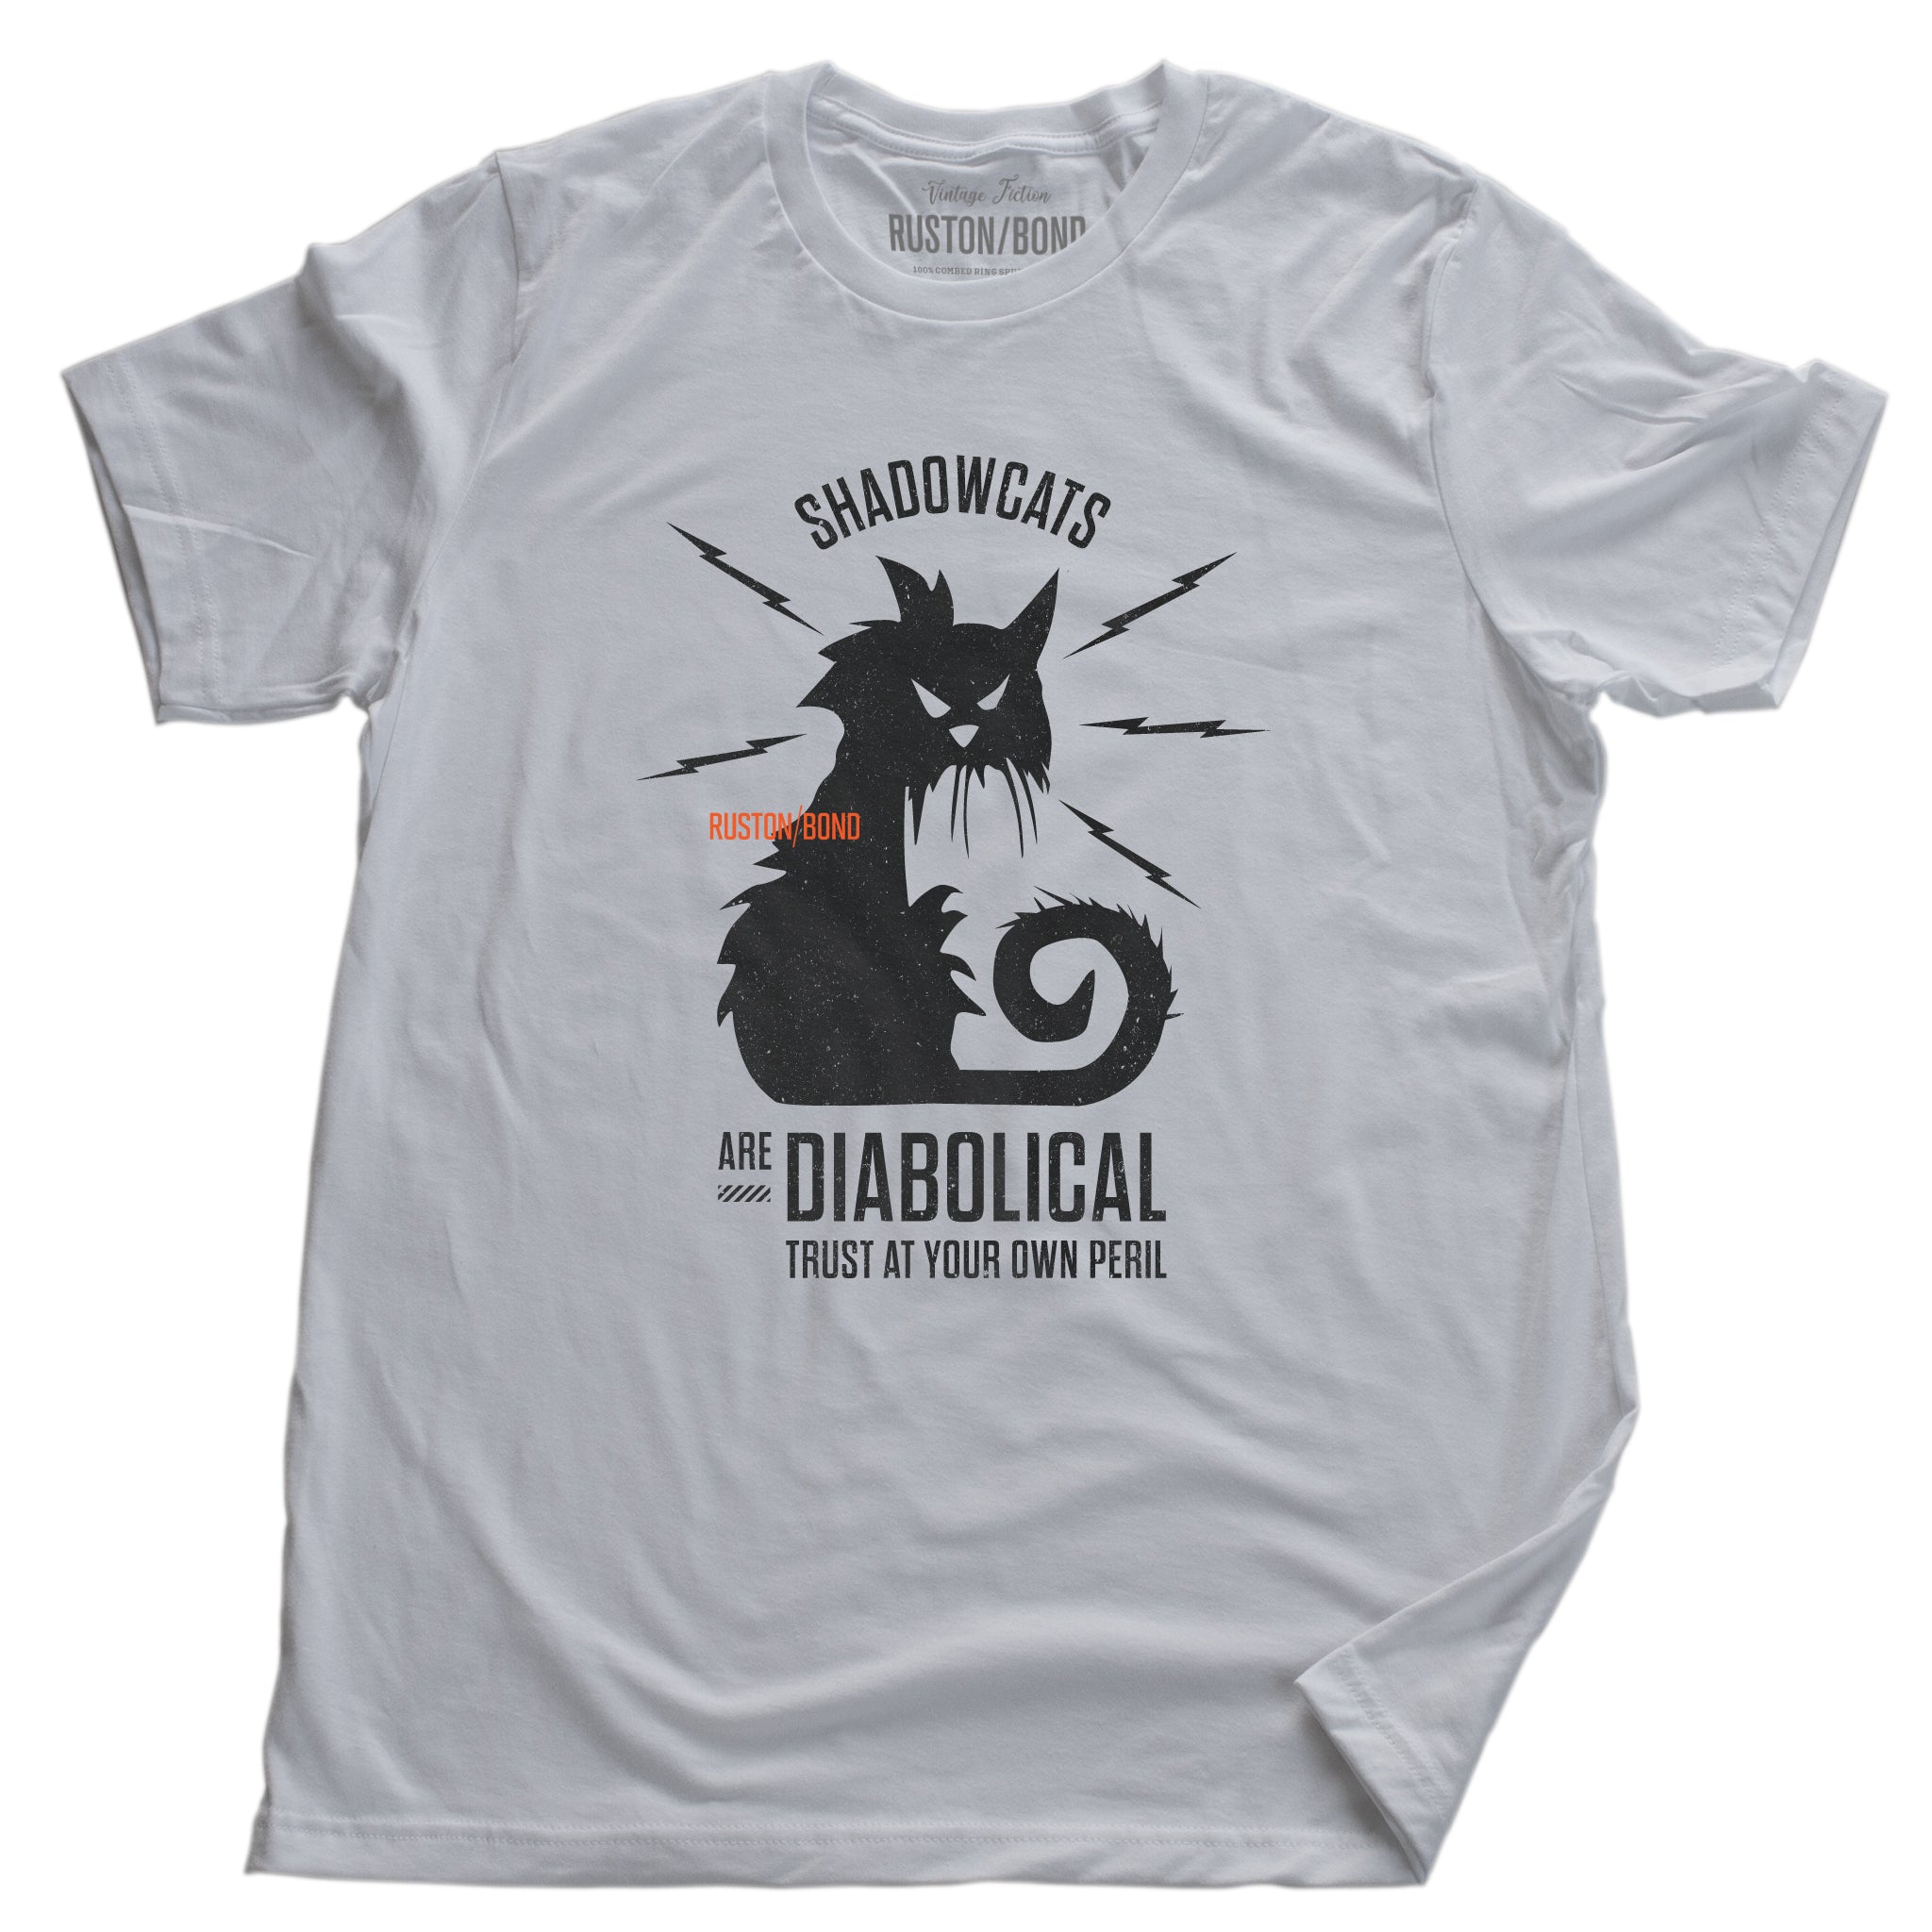 A sarcastic retro graphic t-shirt in White, with a classic vintage design, featuring an angry, electric cat surrounded by the words “Shadowcats are diabolical—trust at your own peril.” By fashion brand Ruston/Bond, for wolfsaint.net